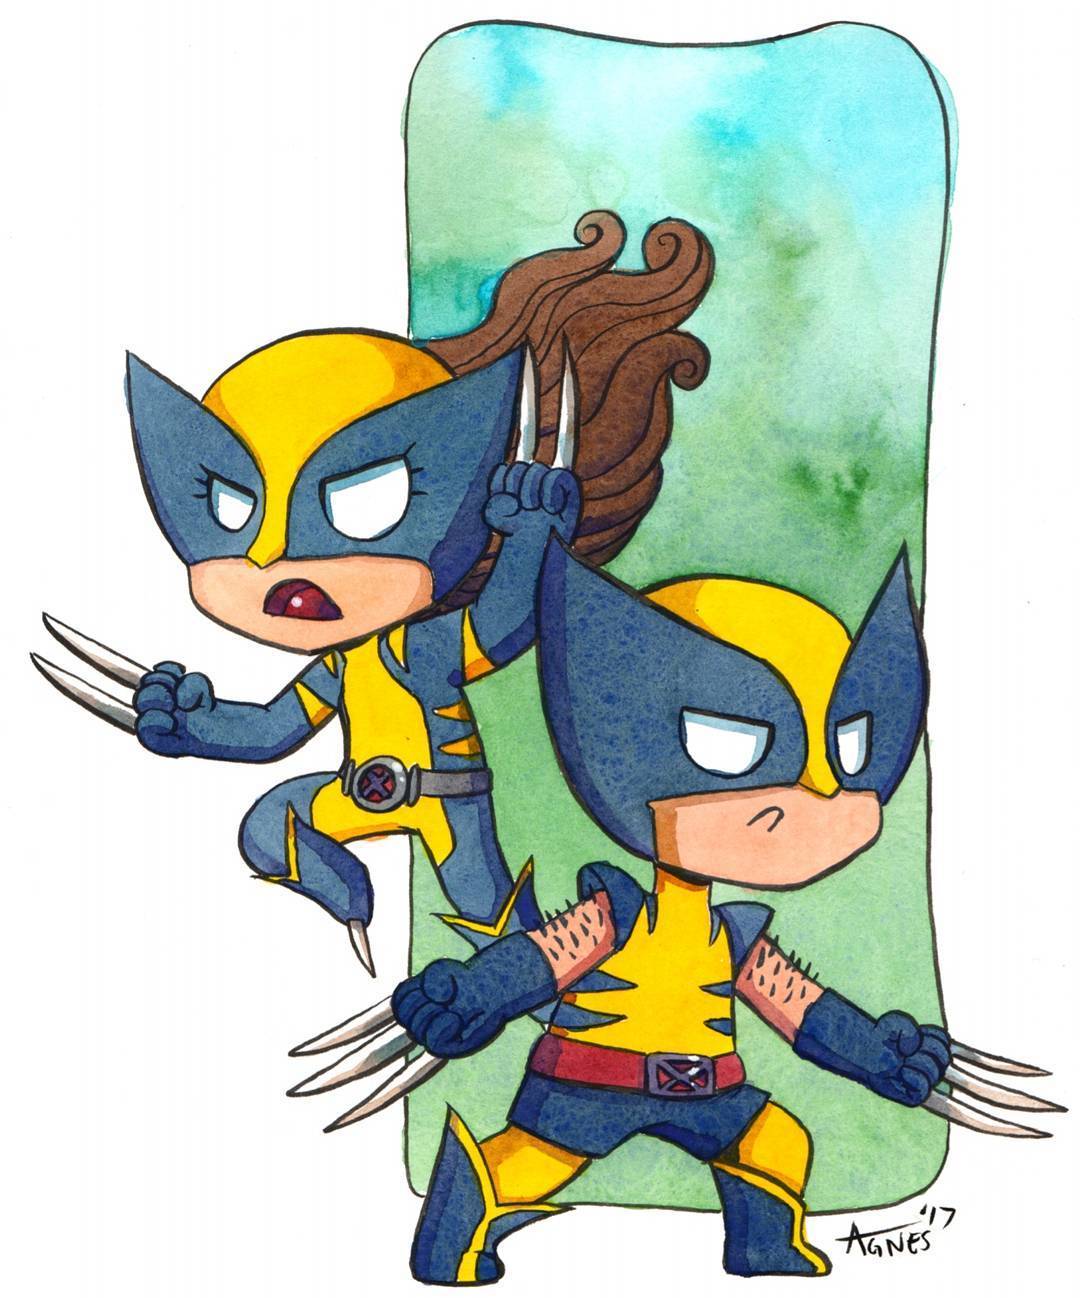 agnesgarbowska:
“X-23 & Wolverine watercolour! This piece with be for sale at #SDCC at table GG-17. 😊😊 #x23 #wolverine #logan #cute #chibi #weaponx #kawaii #watercolor #watercolour #comic #comics http://ift.tt/2tY22H3
”